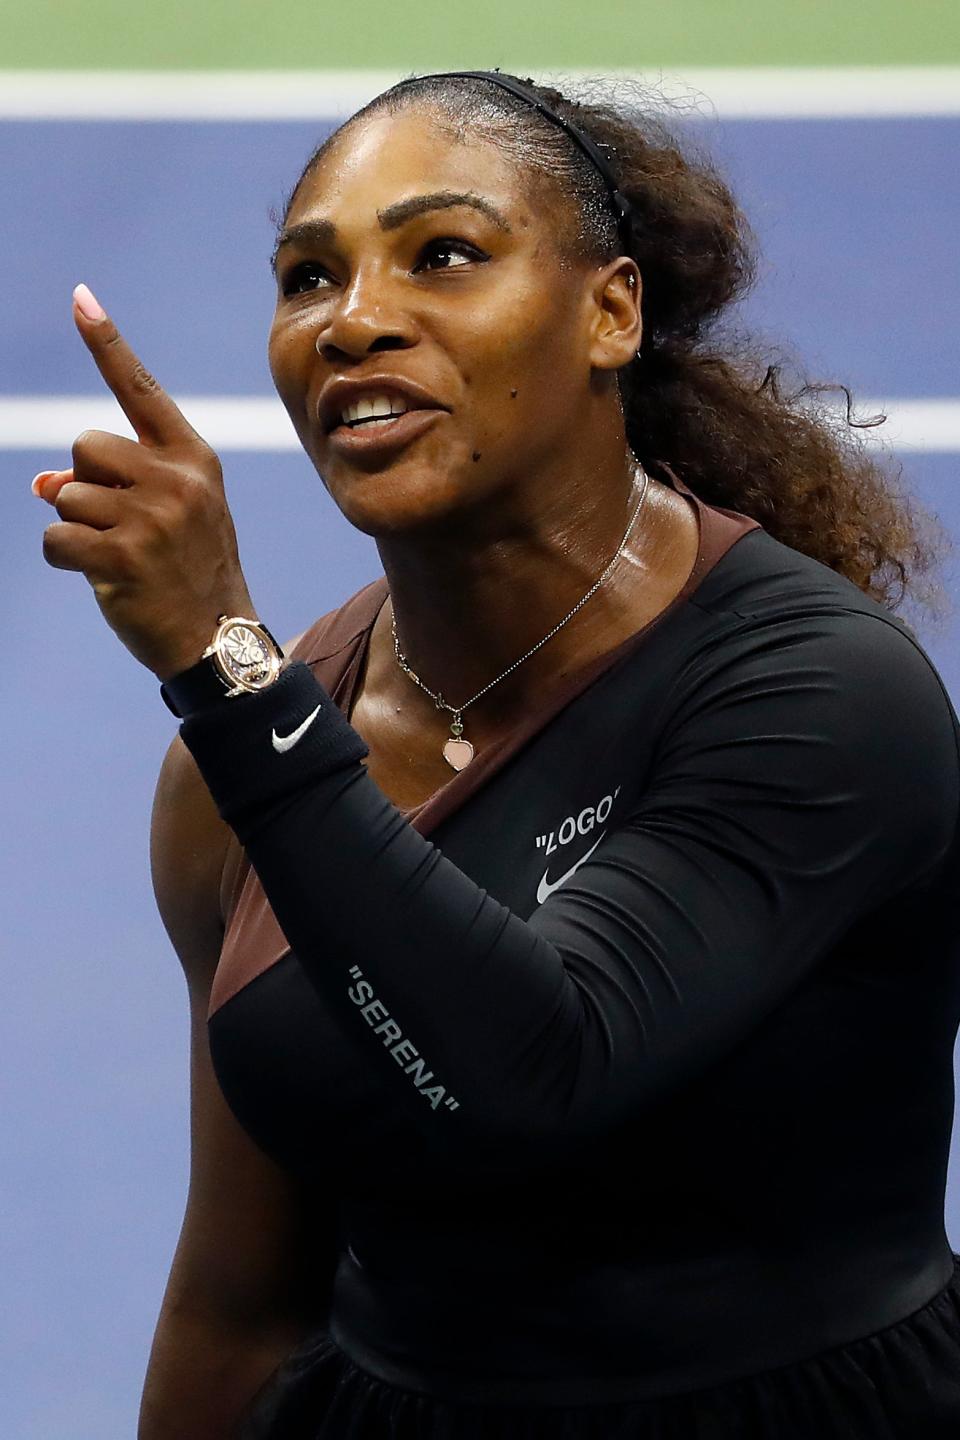 Serena Williams in action on a tennis court, gesturing upwards with her index finger